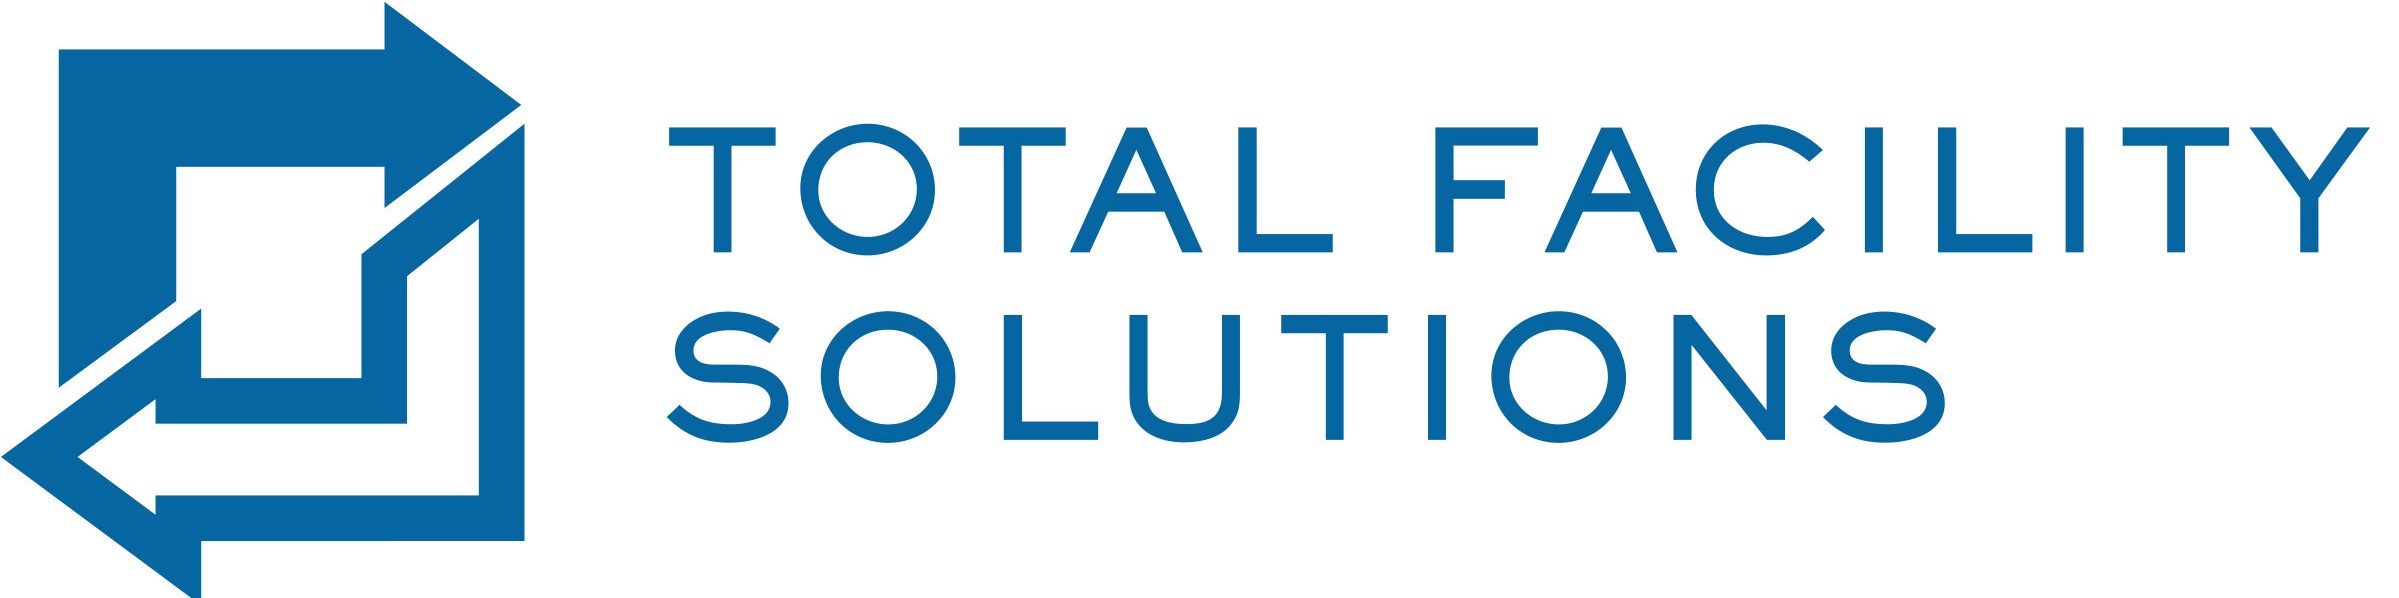 Total Facility Solutions